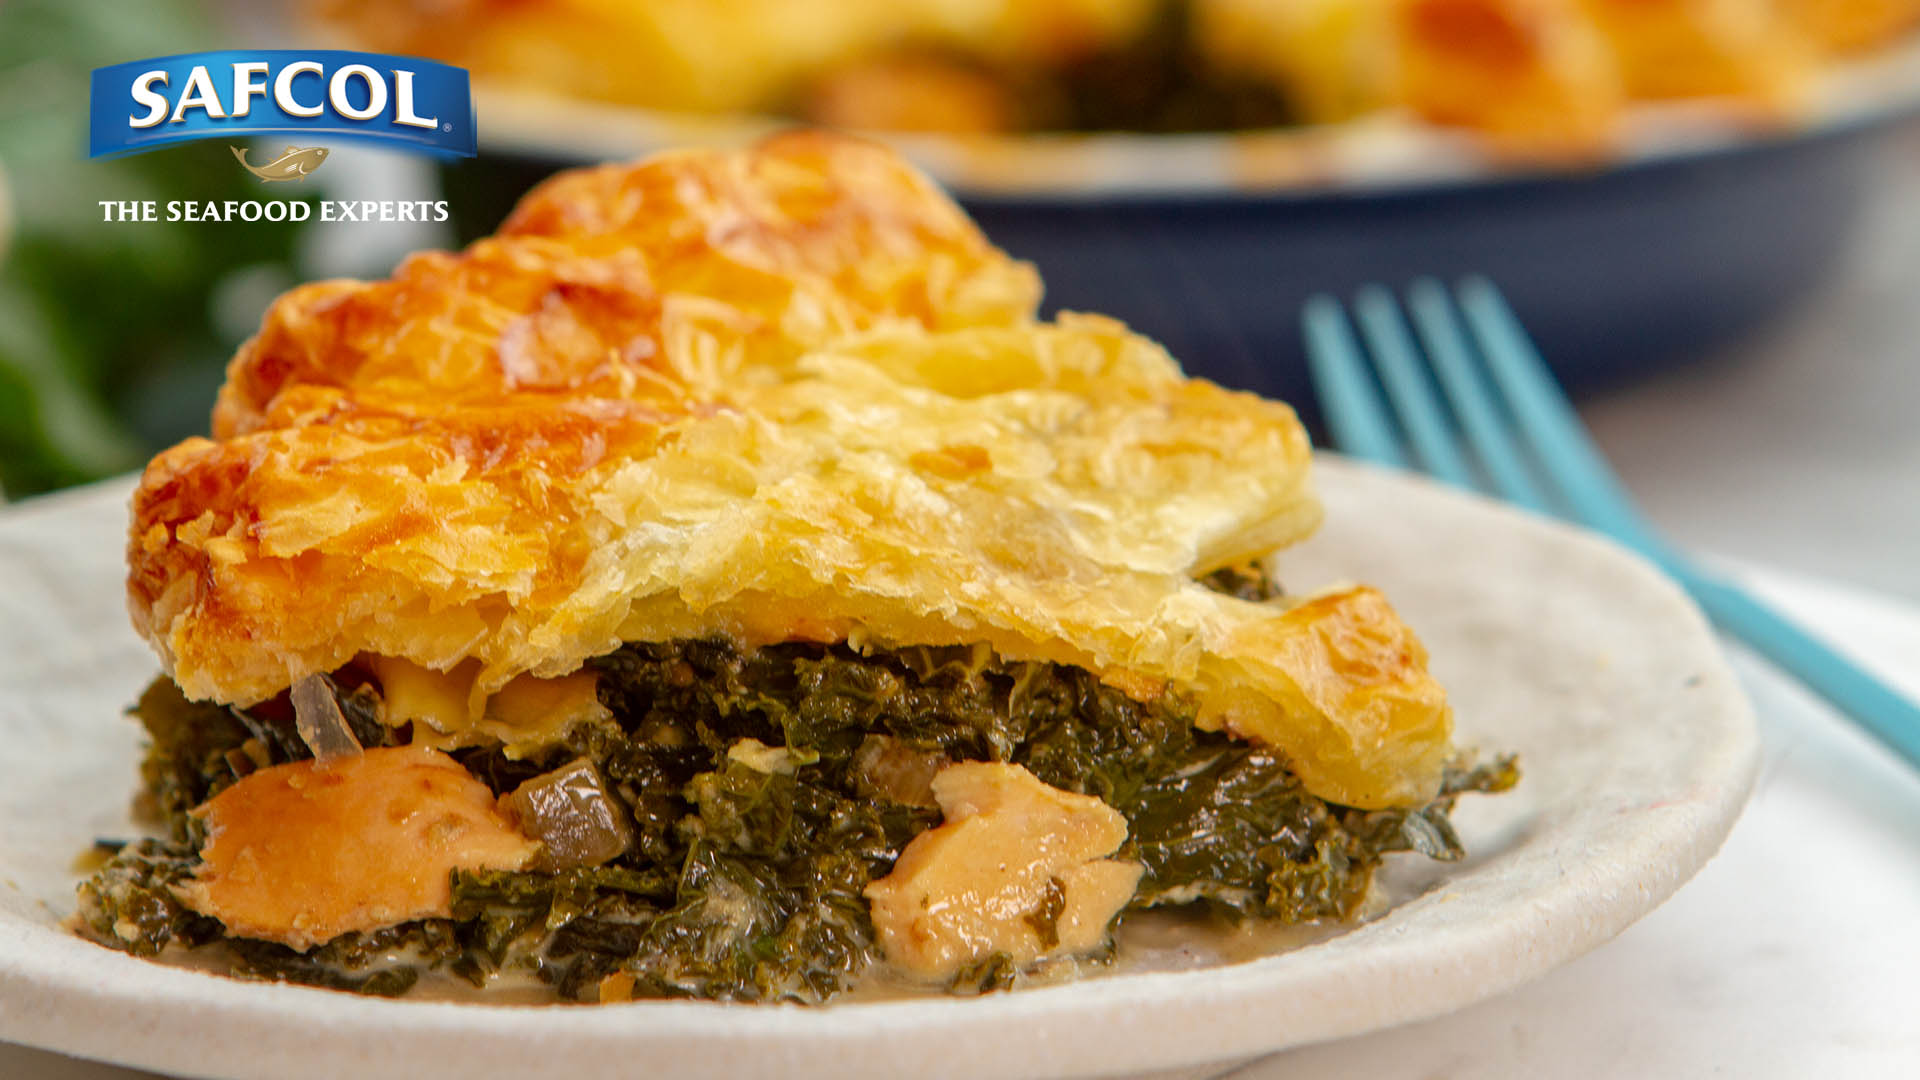 Salmon winter greens pie ... for those cool nights - Seafood Experts